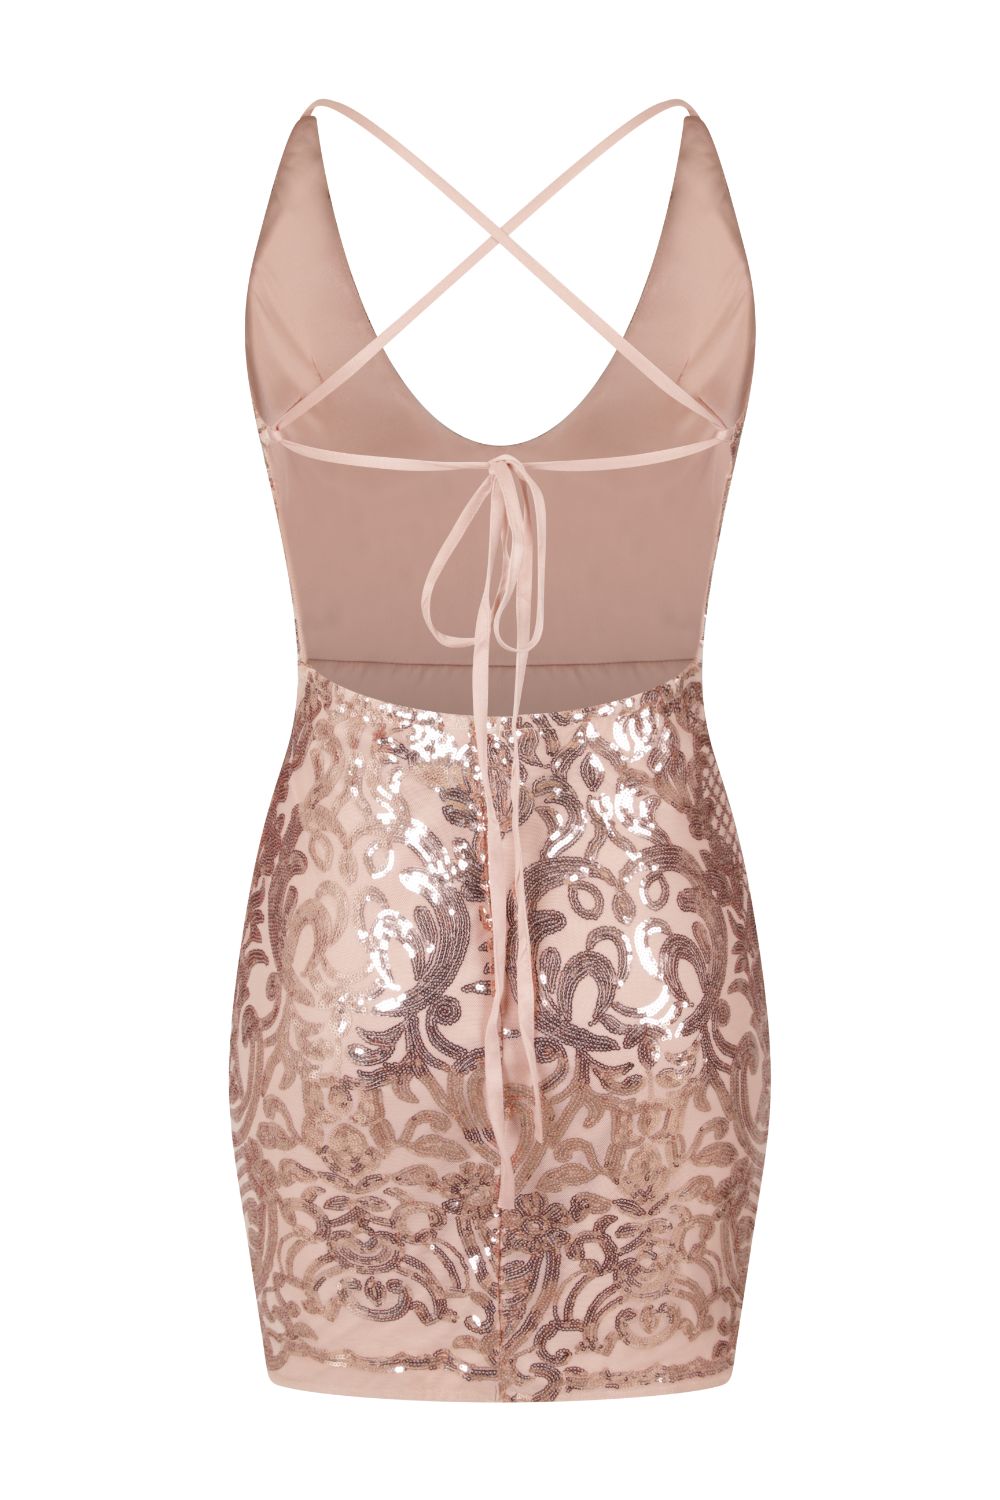 Icey Vip Rose Gold Nude Plunge Floral Sequin Illusion Mini Dress